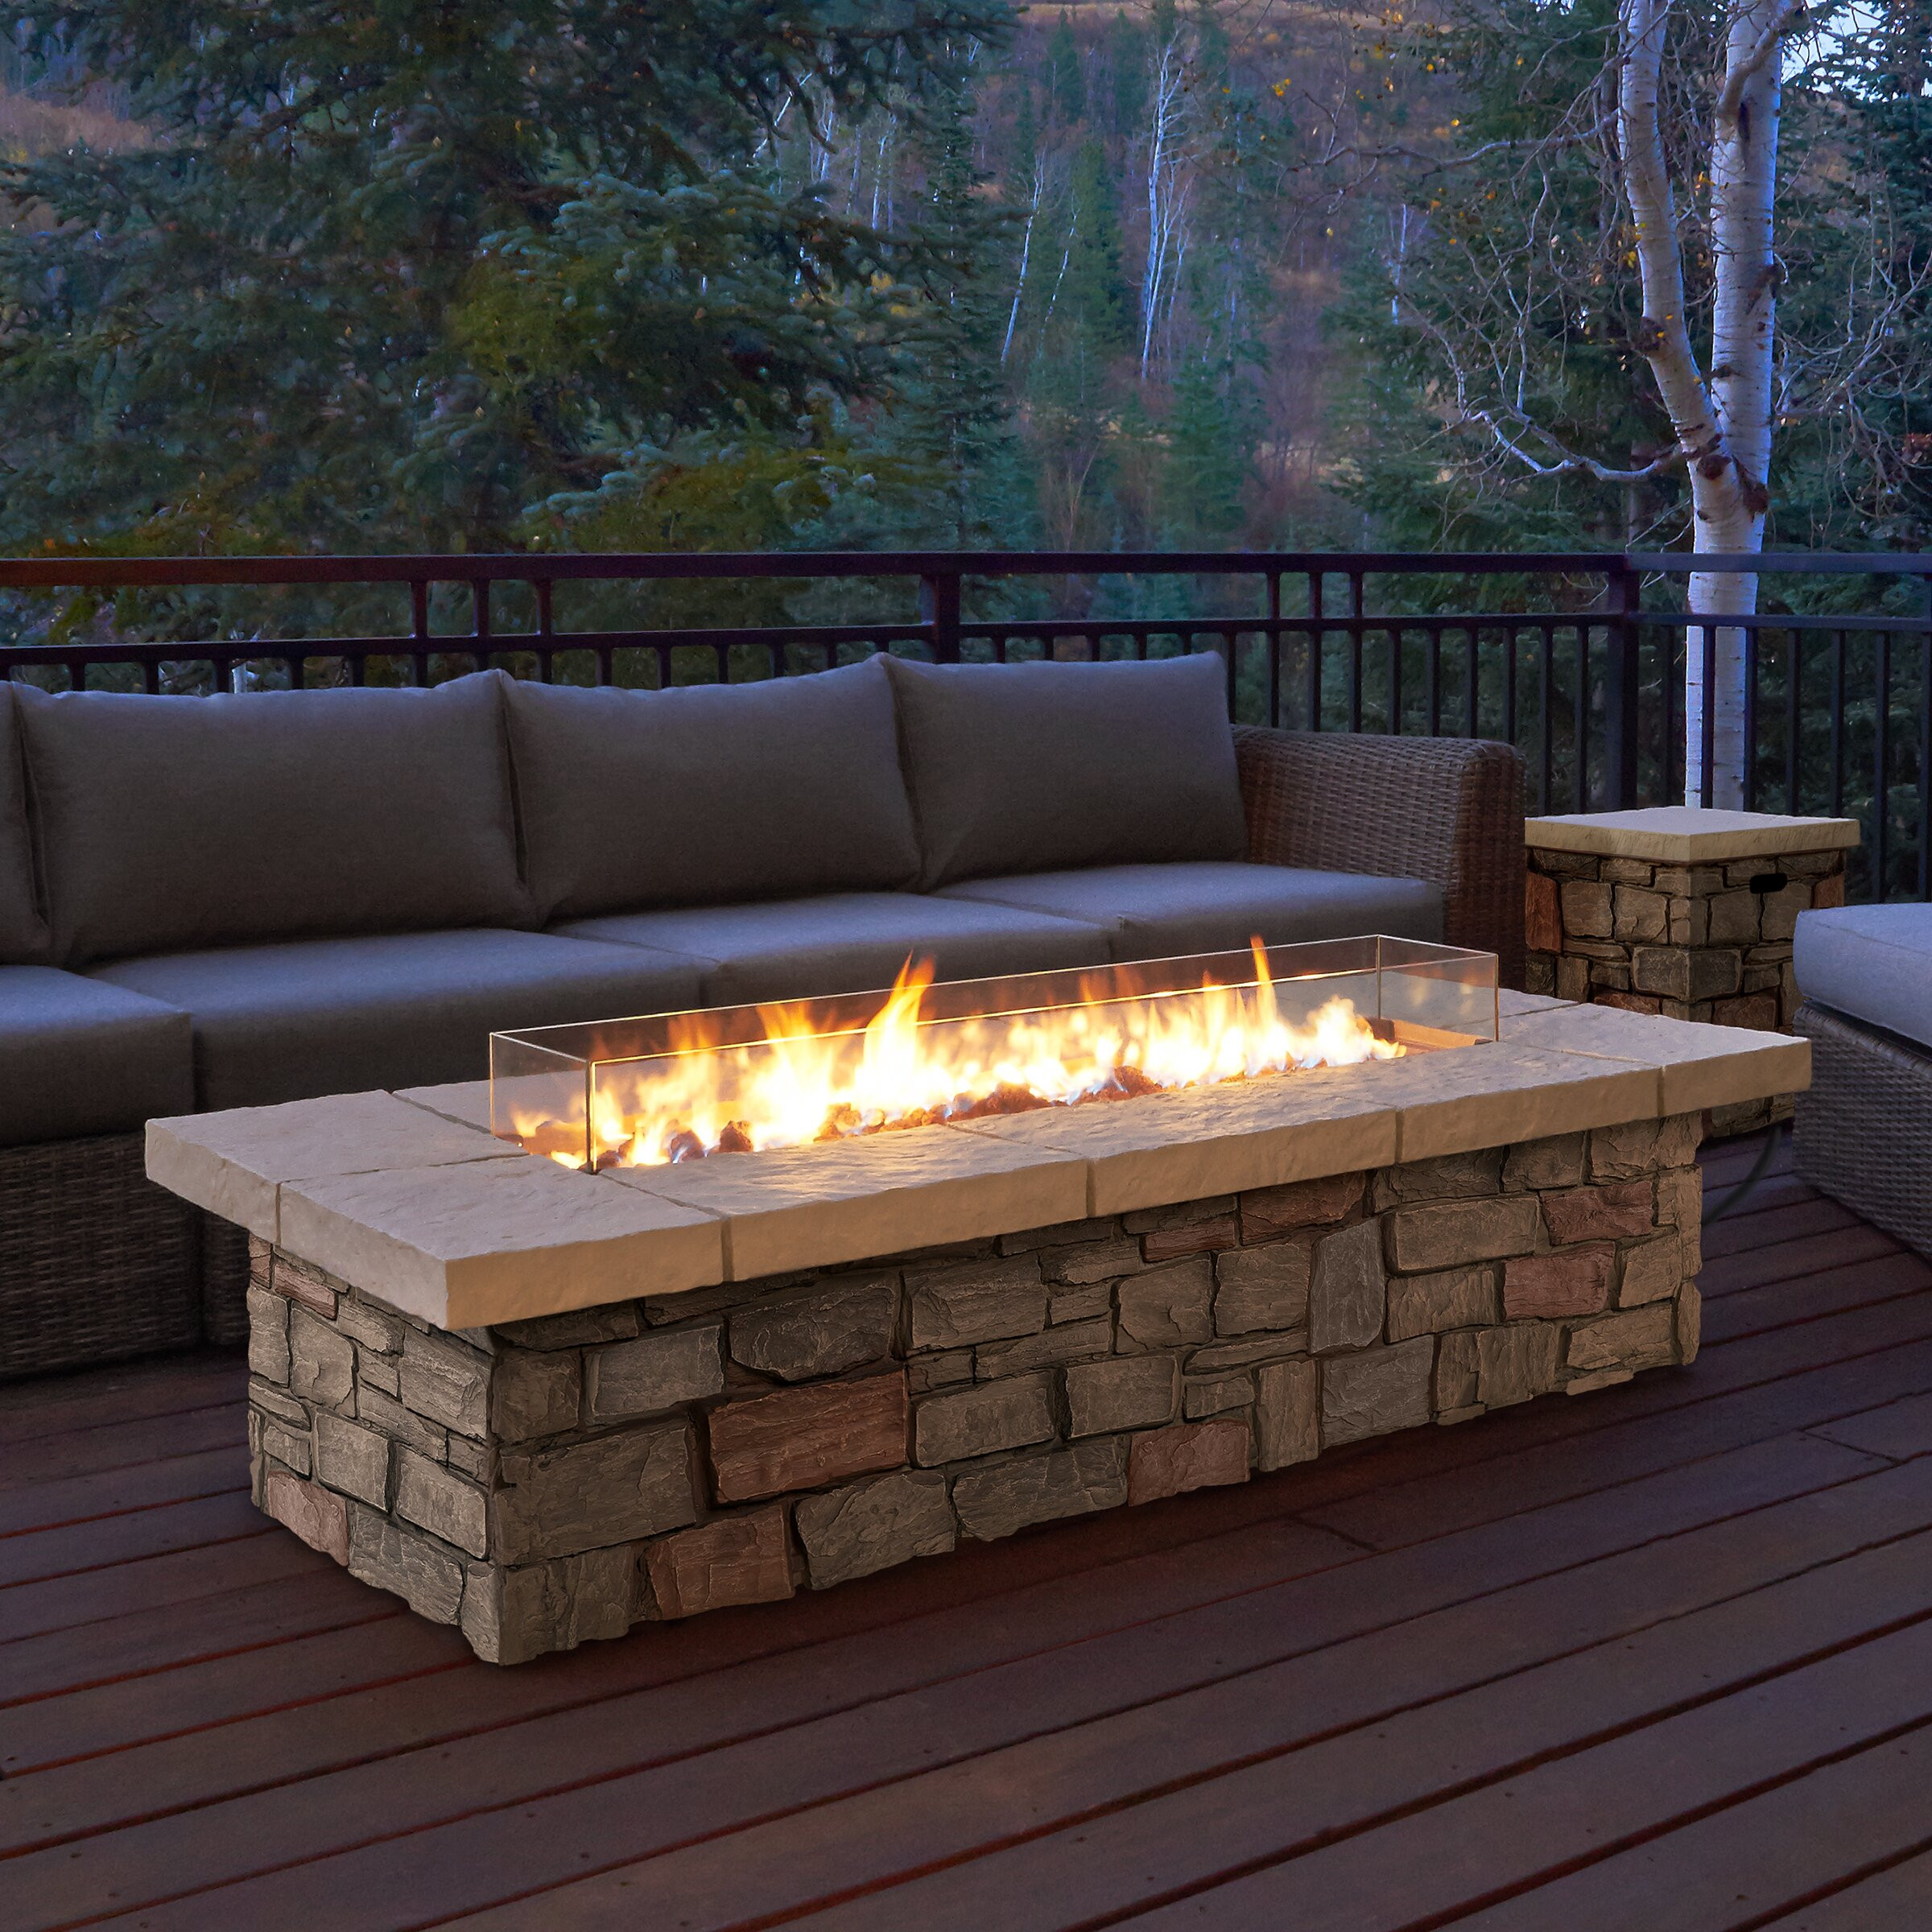 Patio Fire Pit Propane
 Real Flame Sedona Propane Fire Pit Table & Reviews